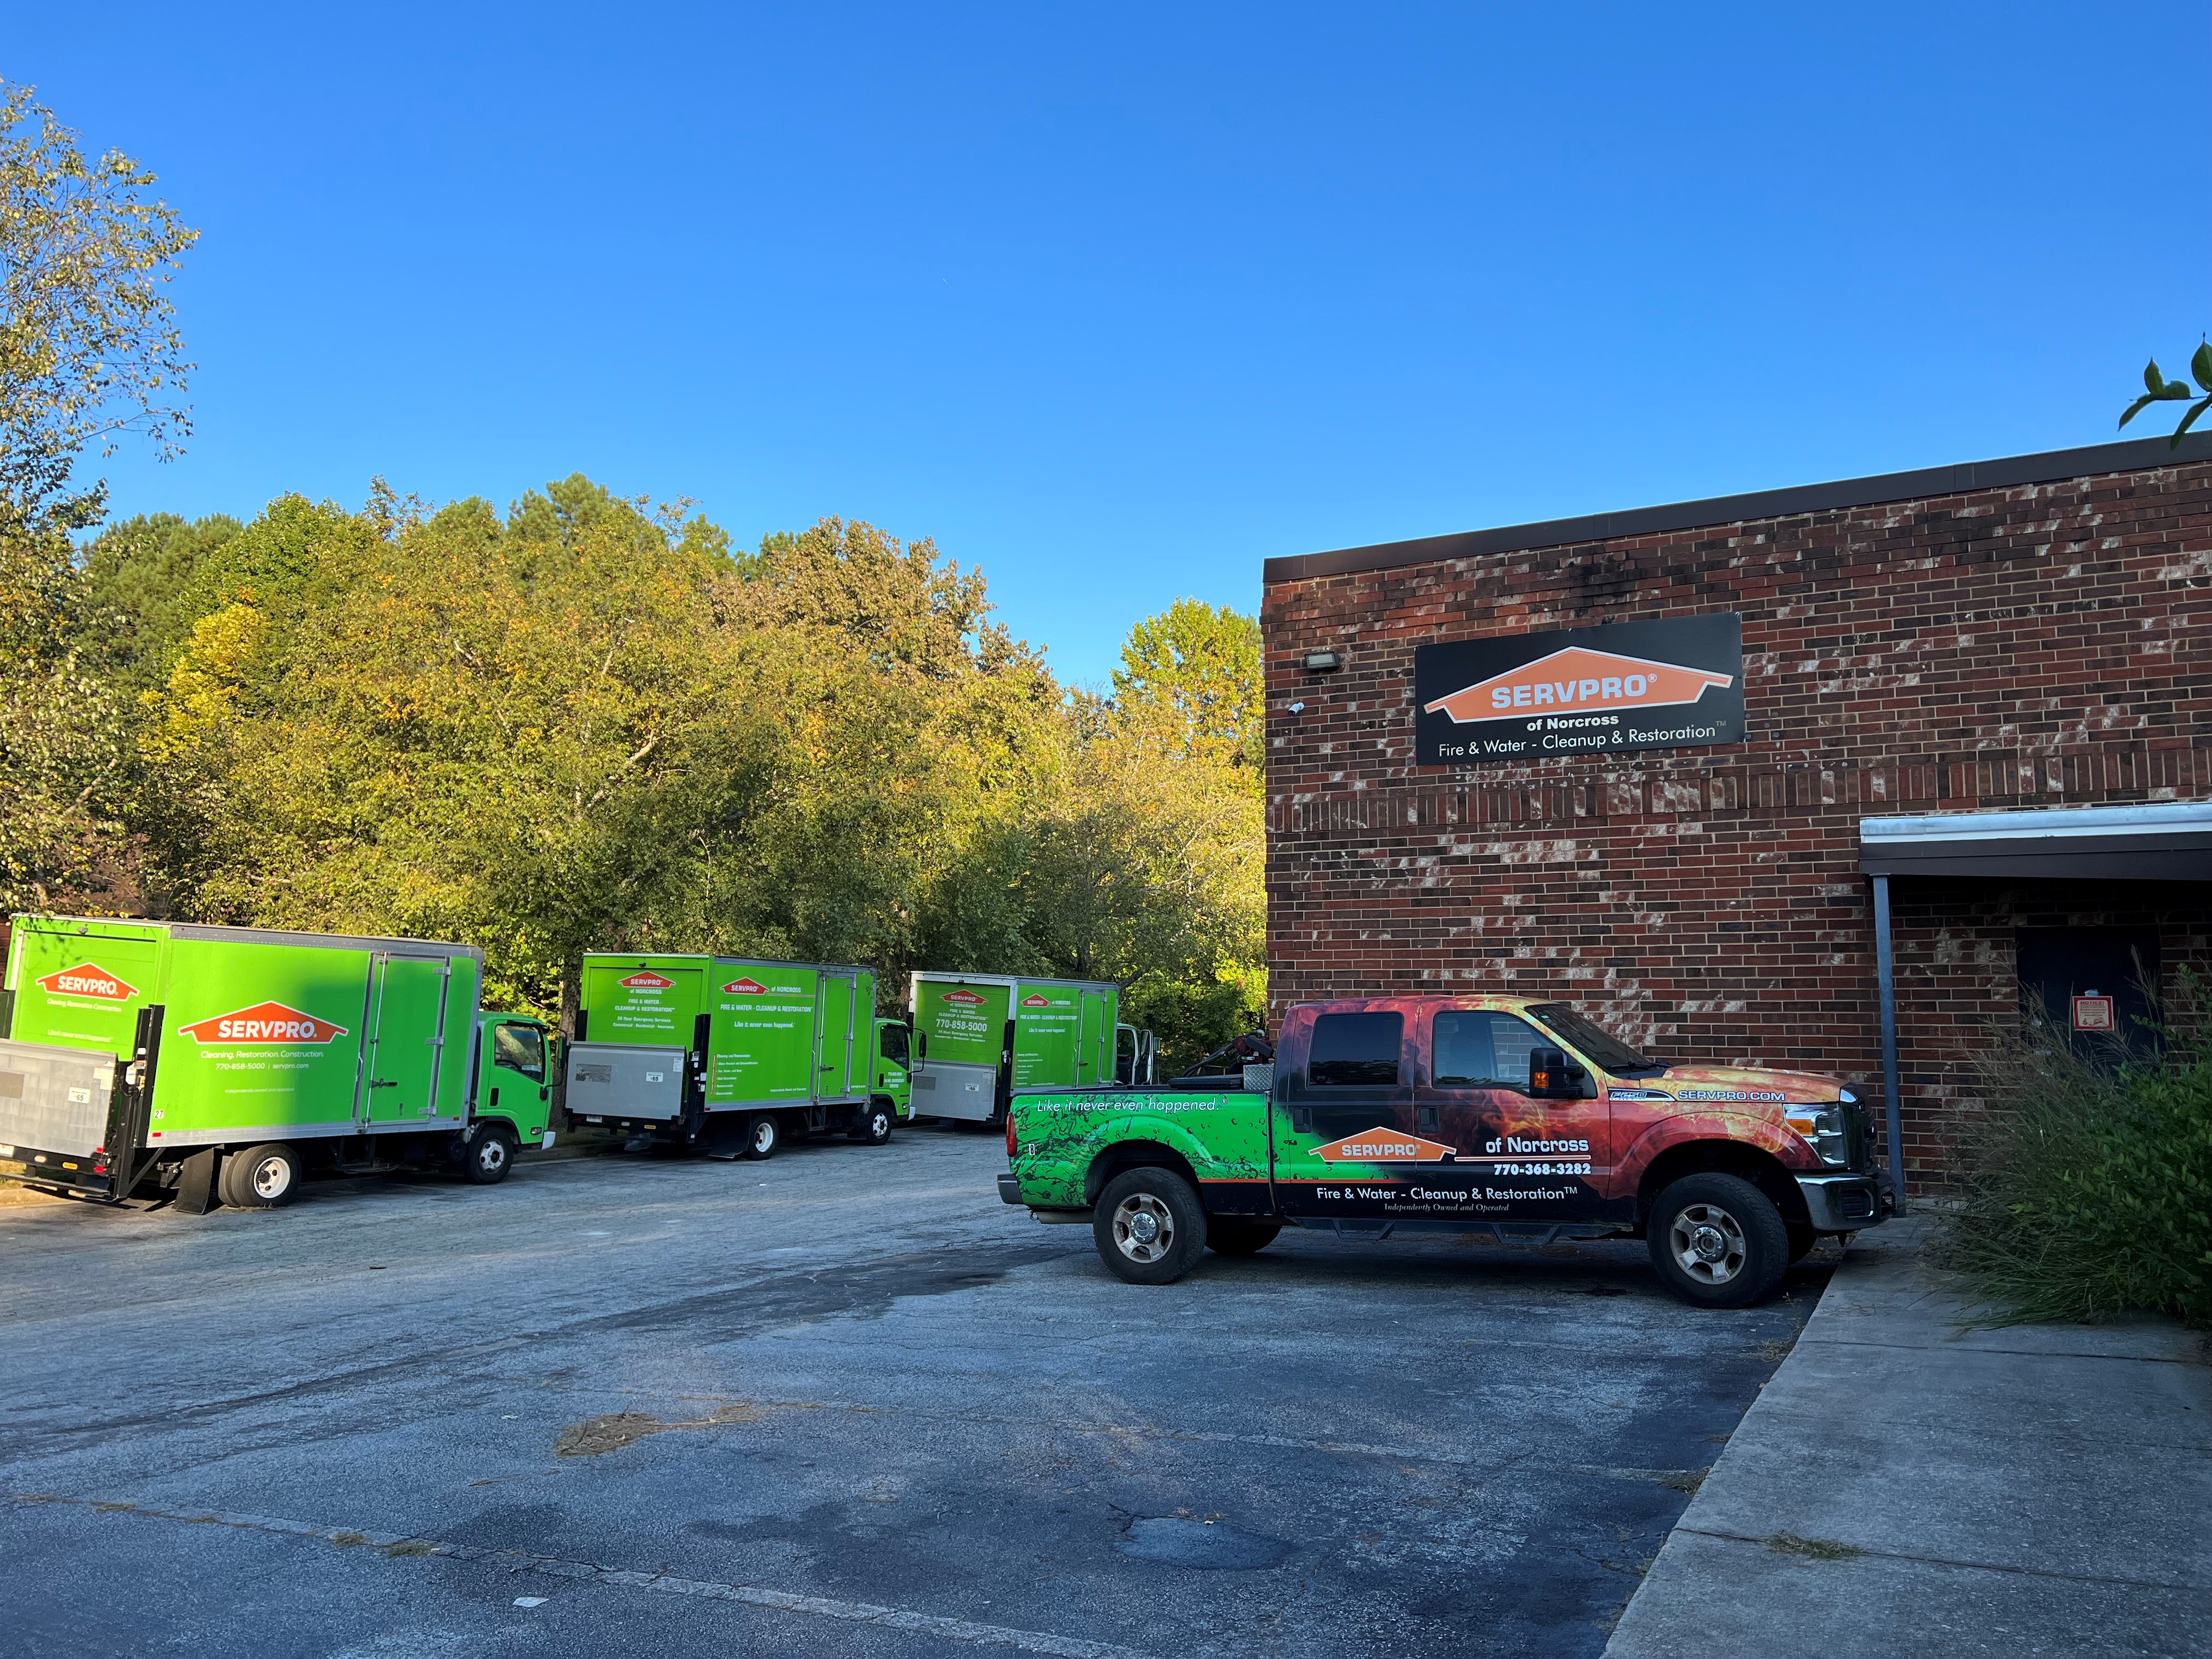 SERVPRO of Norcross and Duluth